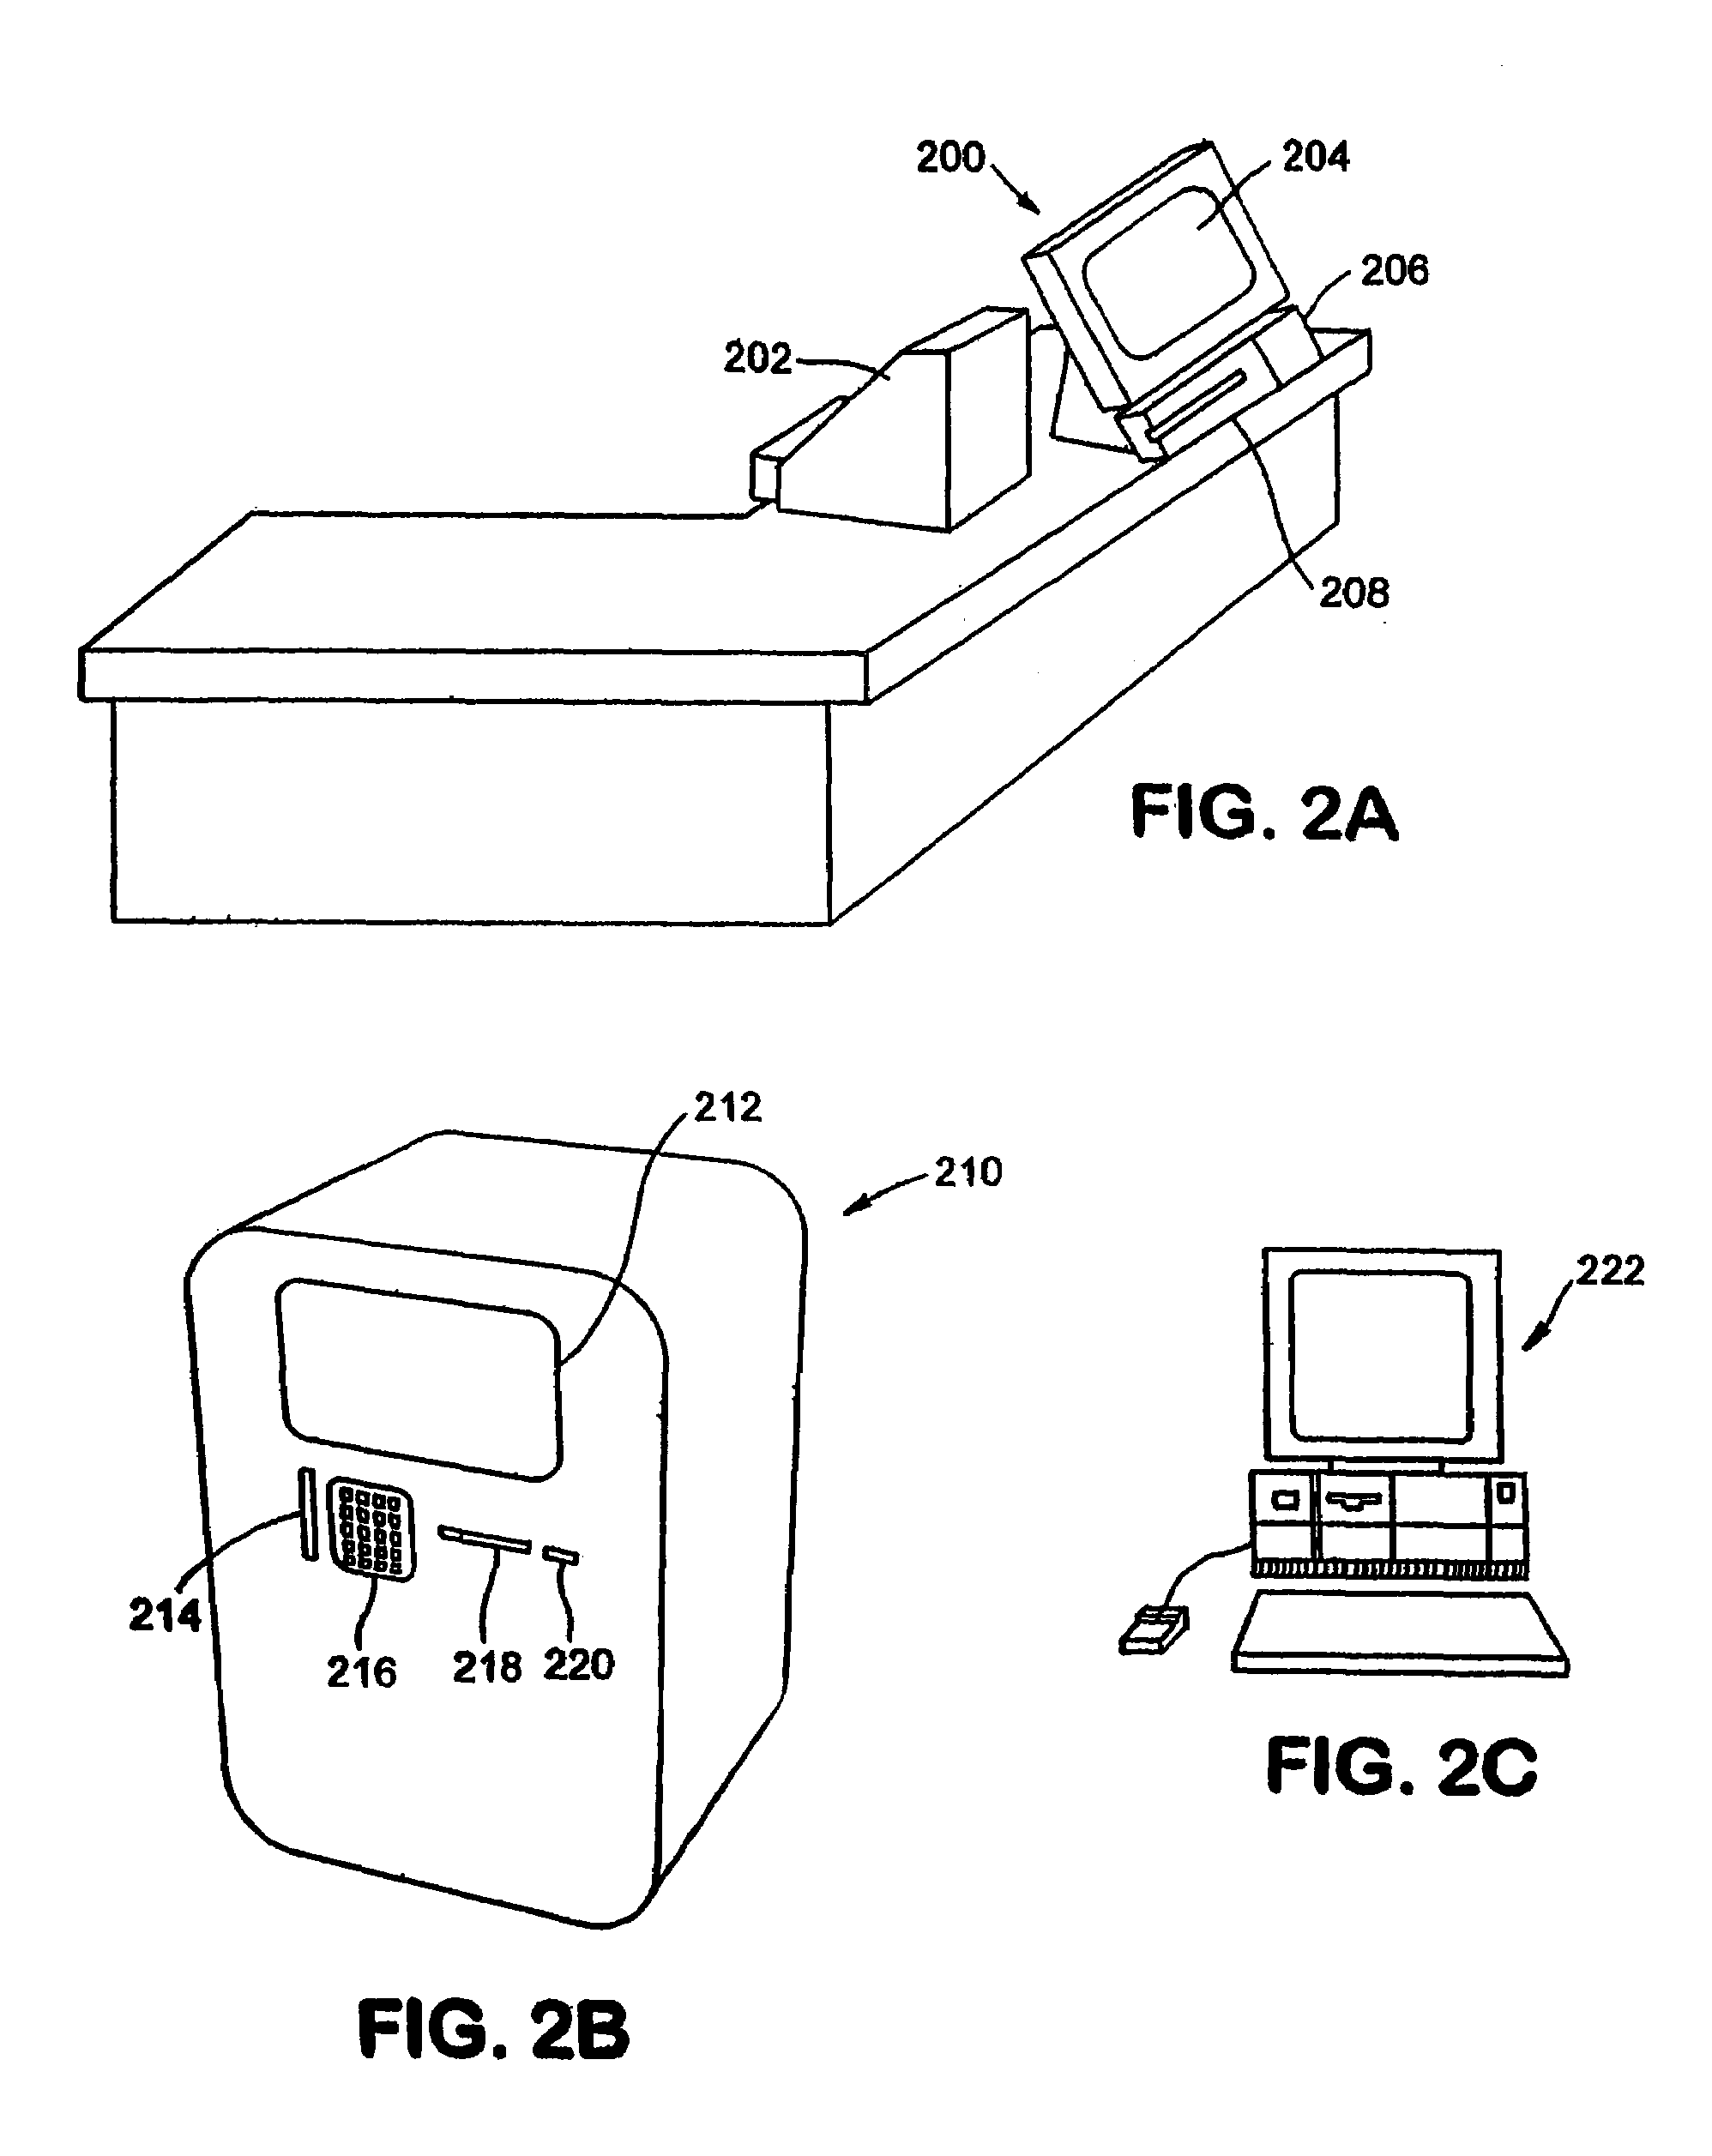 System and method for personal identification number distribution and delivery